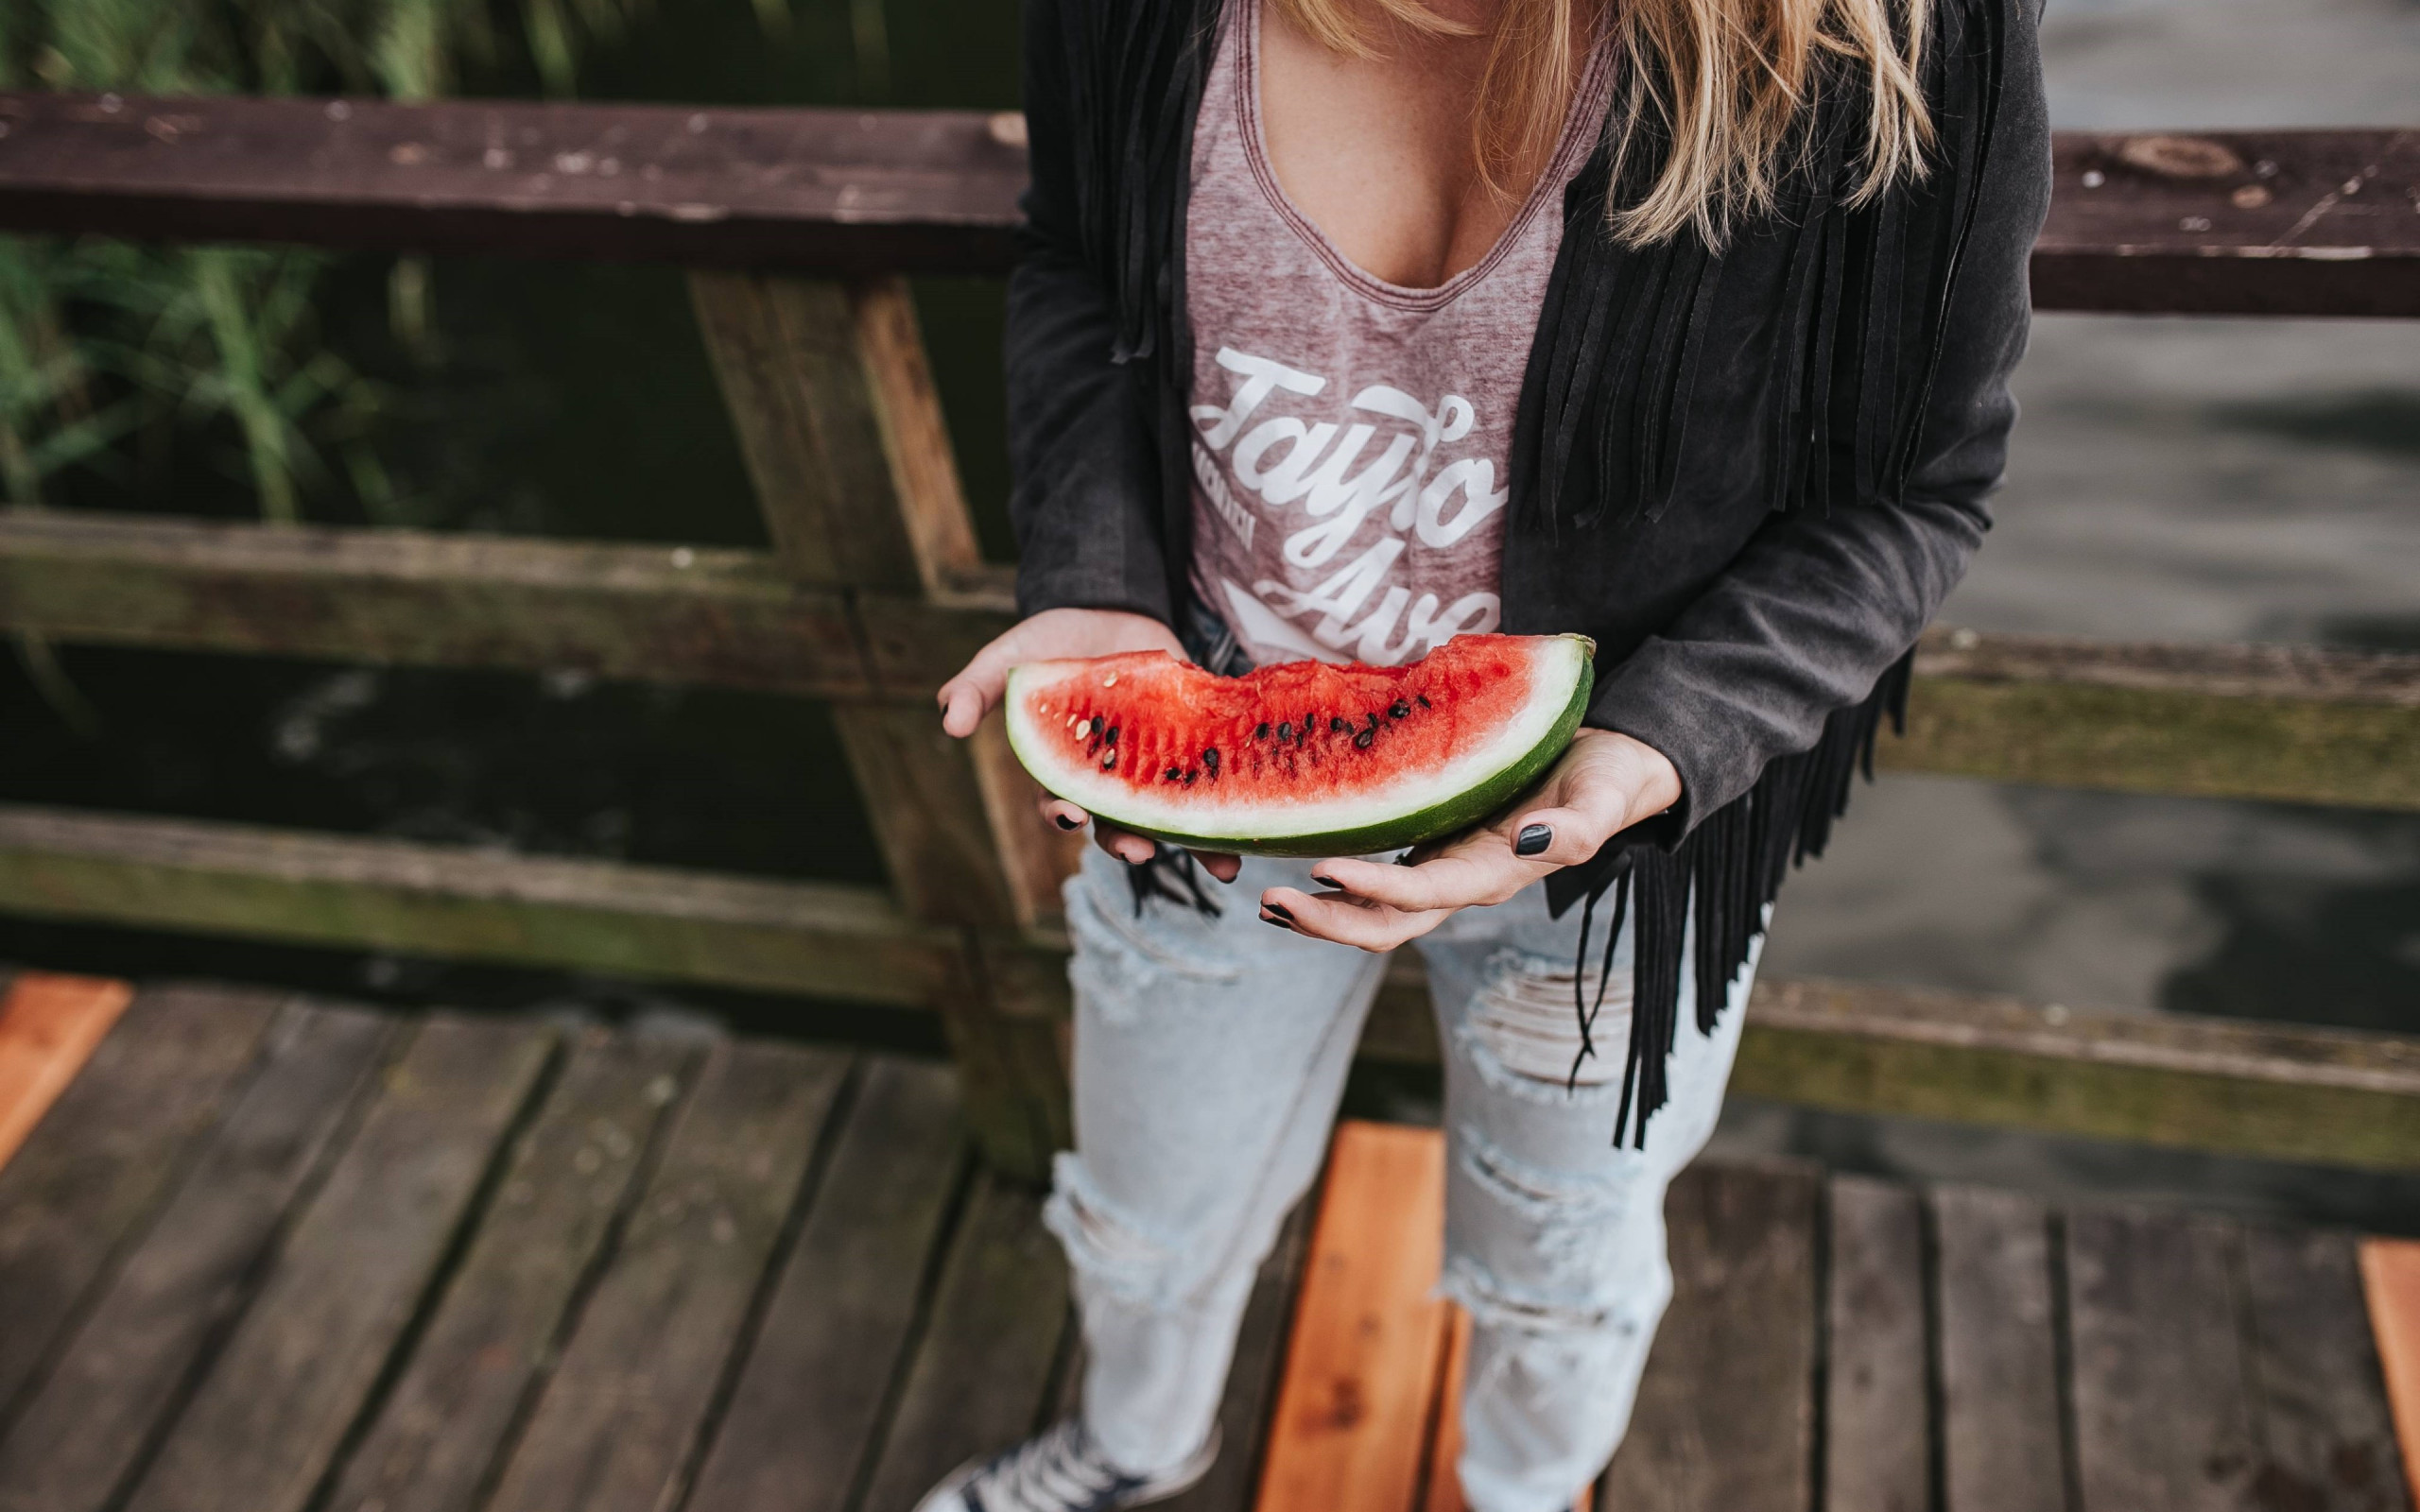 The girl with a watermelon slice wallpaper 2560x1600